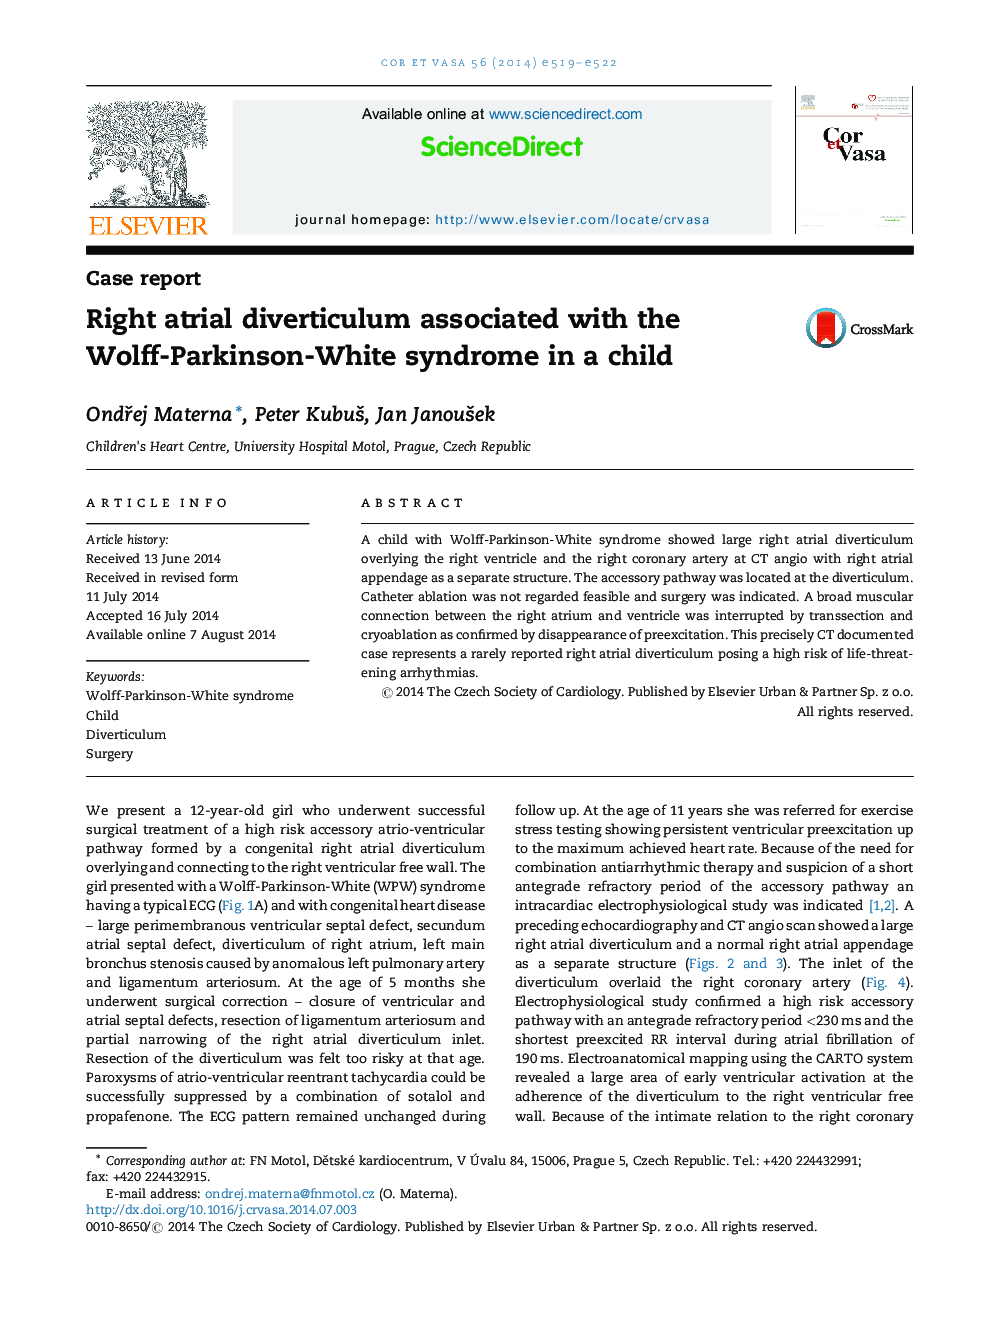 Right atrial diverticulum associated with the Wolff-Parkinson-White syndrome in a child